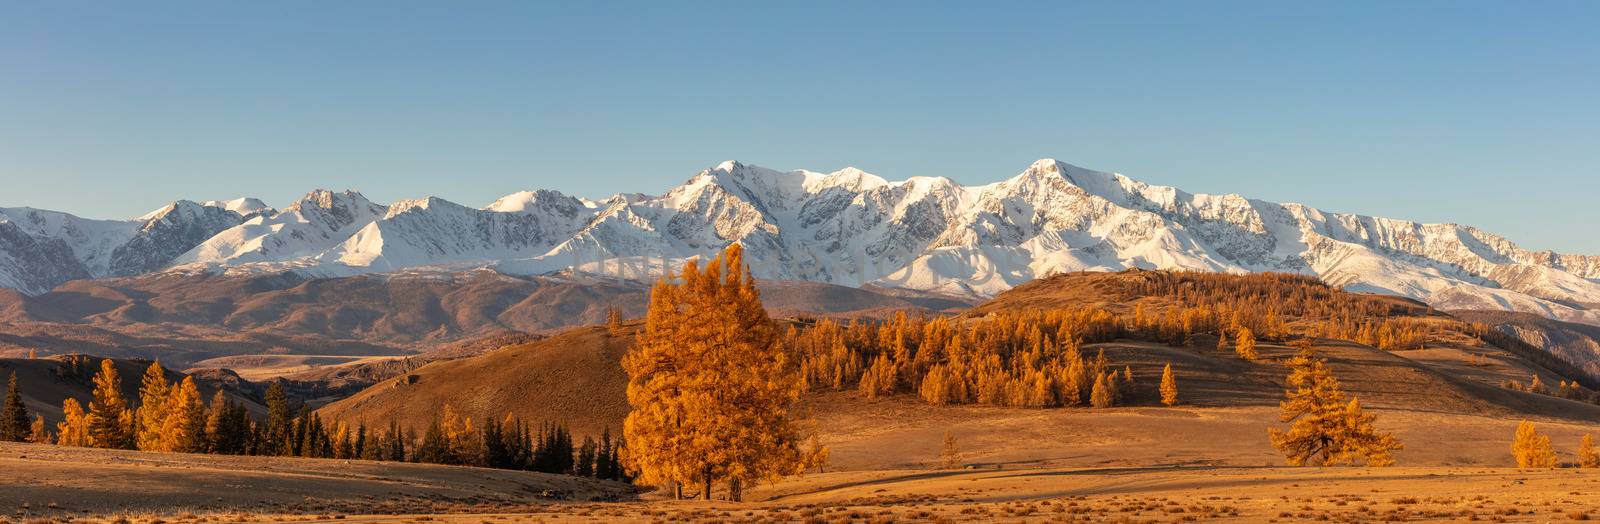 Beautiful panorama with valley full of golden trees in the foreground and white snowy mountains in the background. Sunrise. Golden hour.